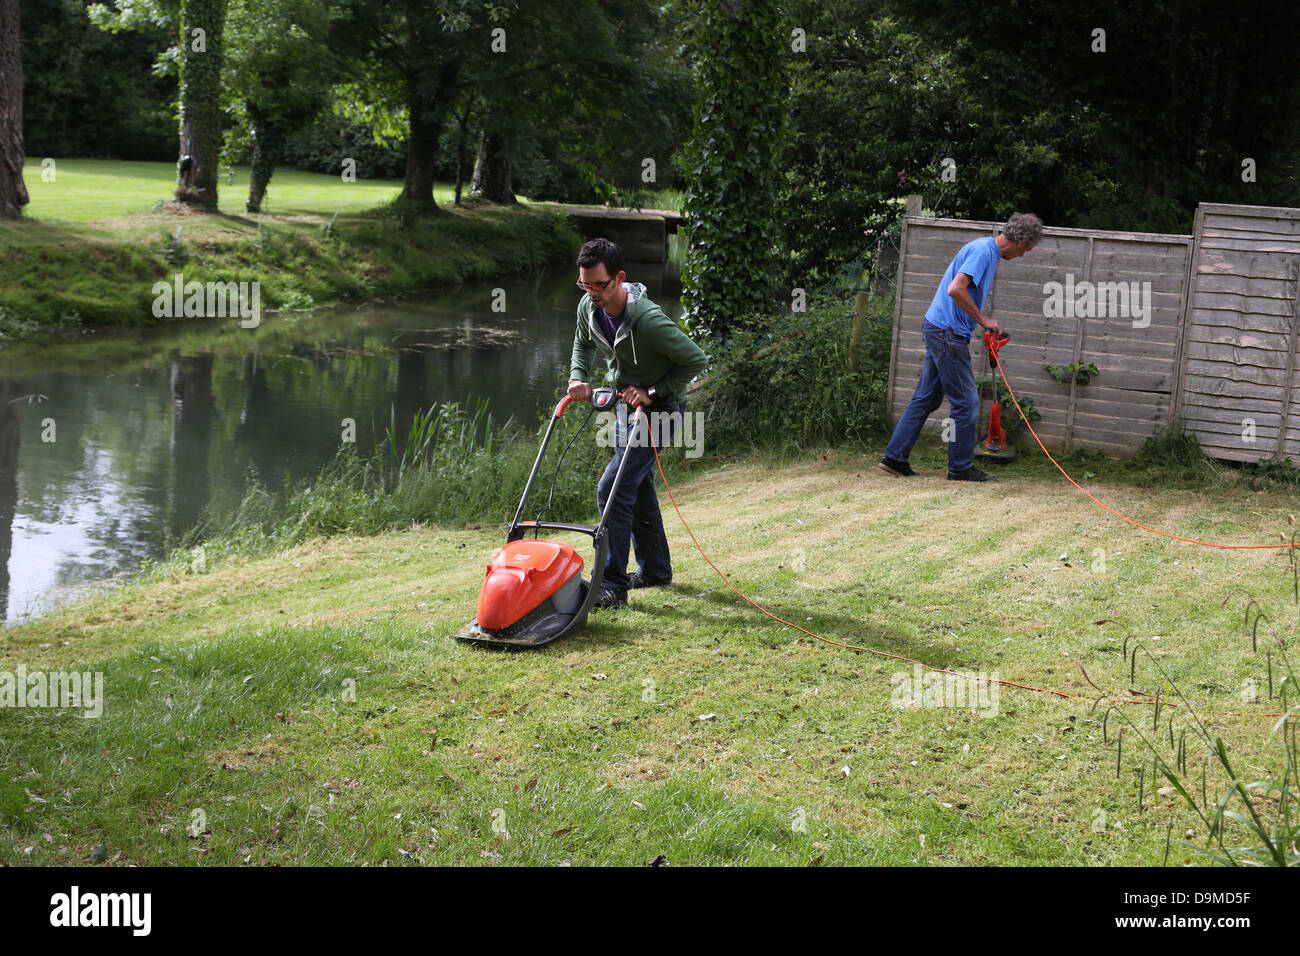 Men Working In Garden One Mowing The Lawn With Flymo Lawnmower And The Other Using A Strimmer By River Gillingham Dorset England Stock Photo